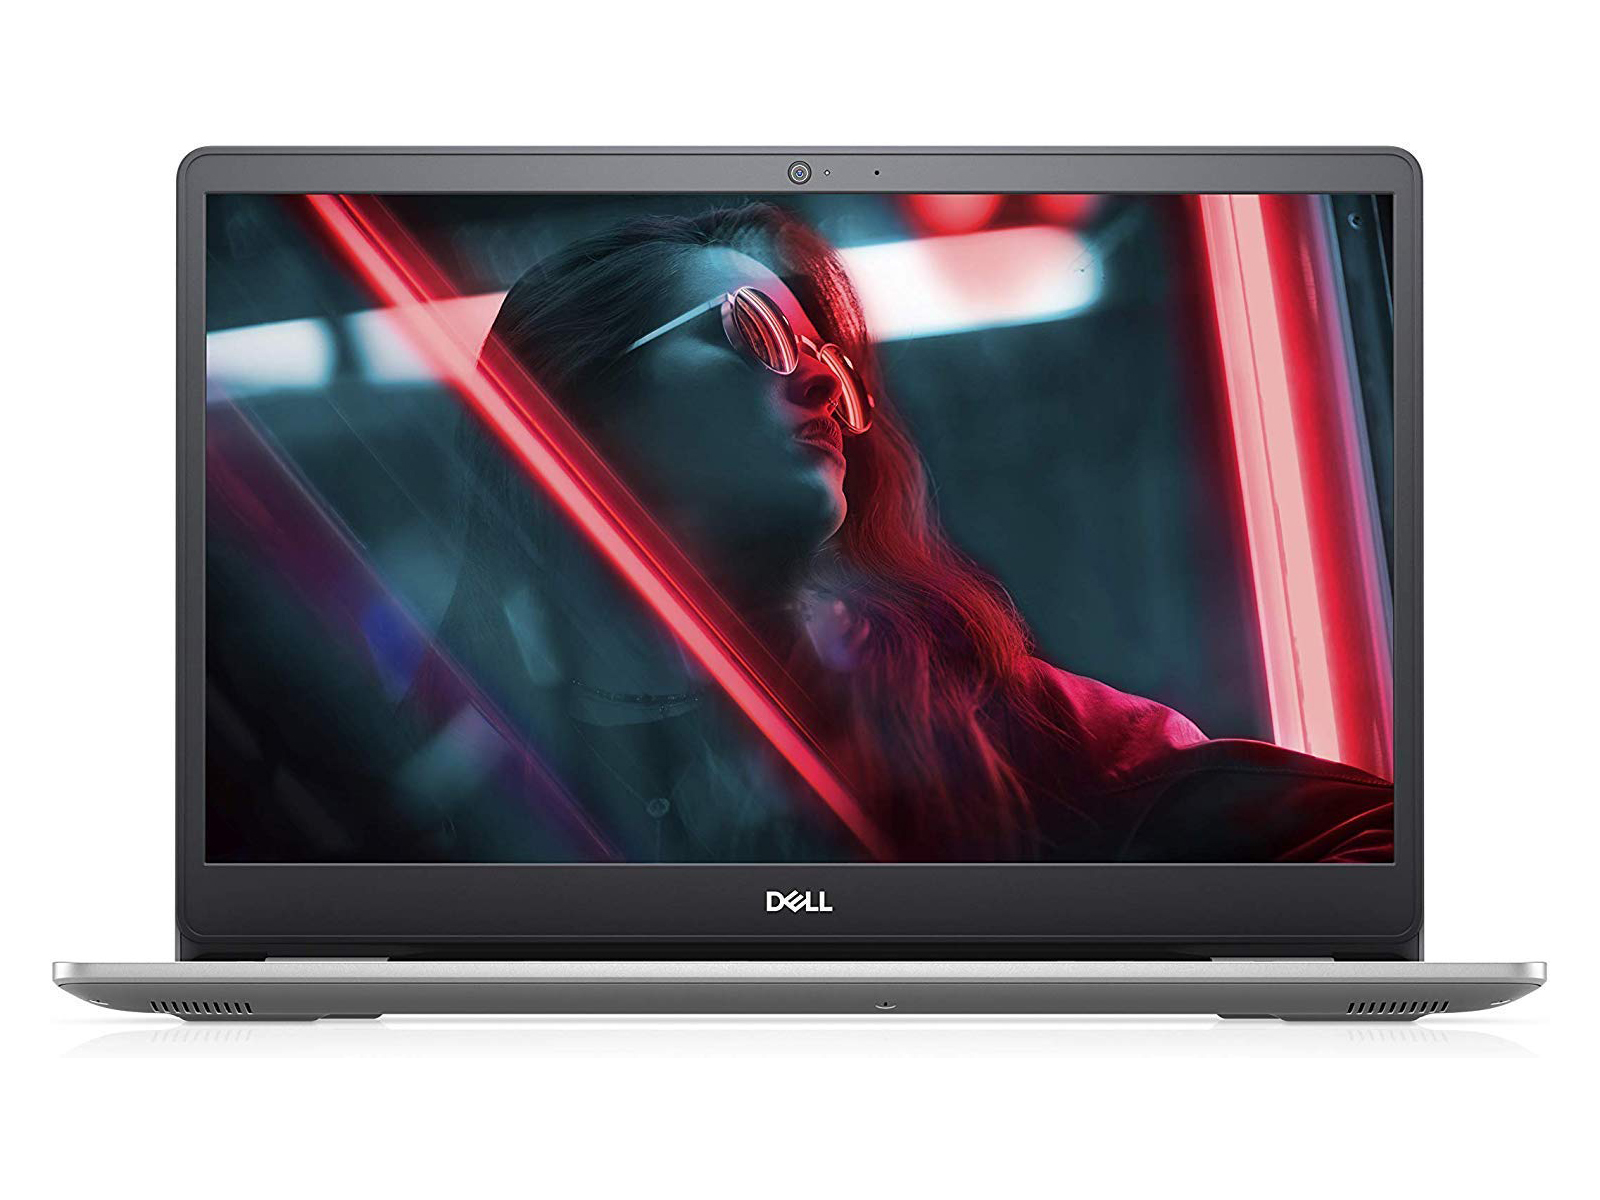 Dell Inspiron 15 5593 laptop review: A win for Intel, but maybe